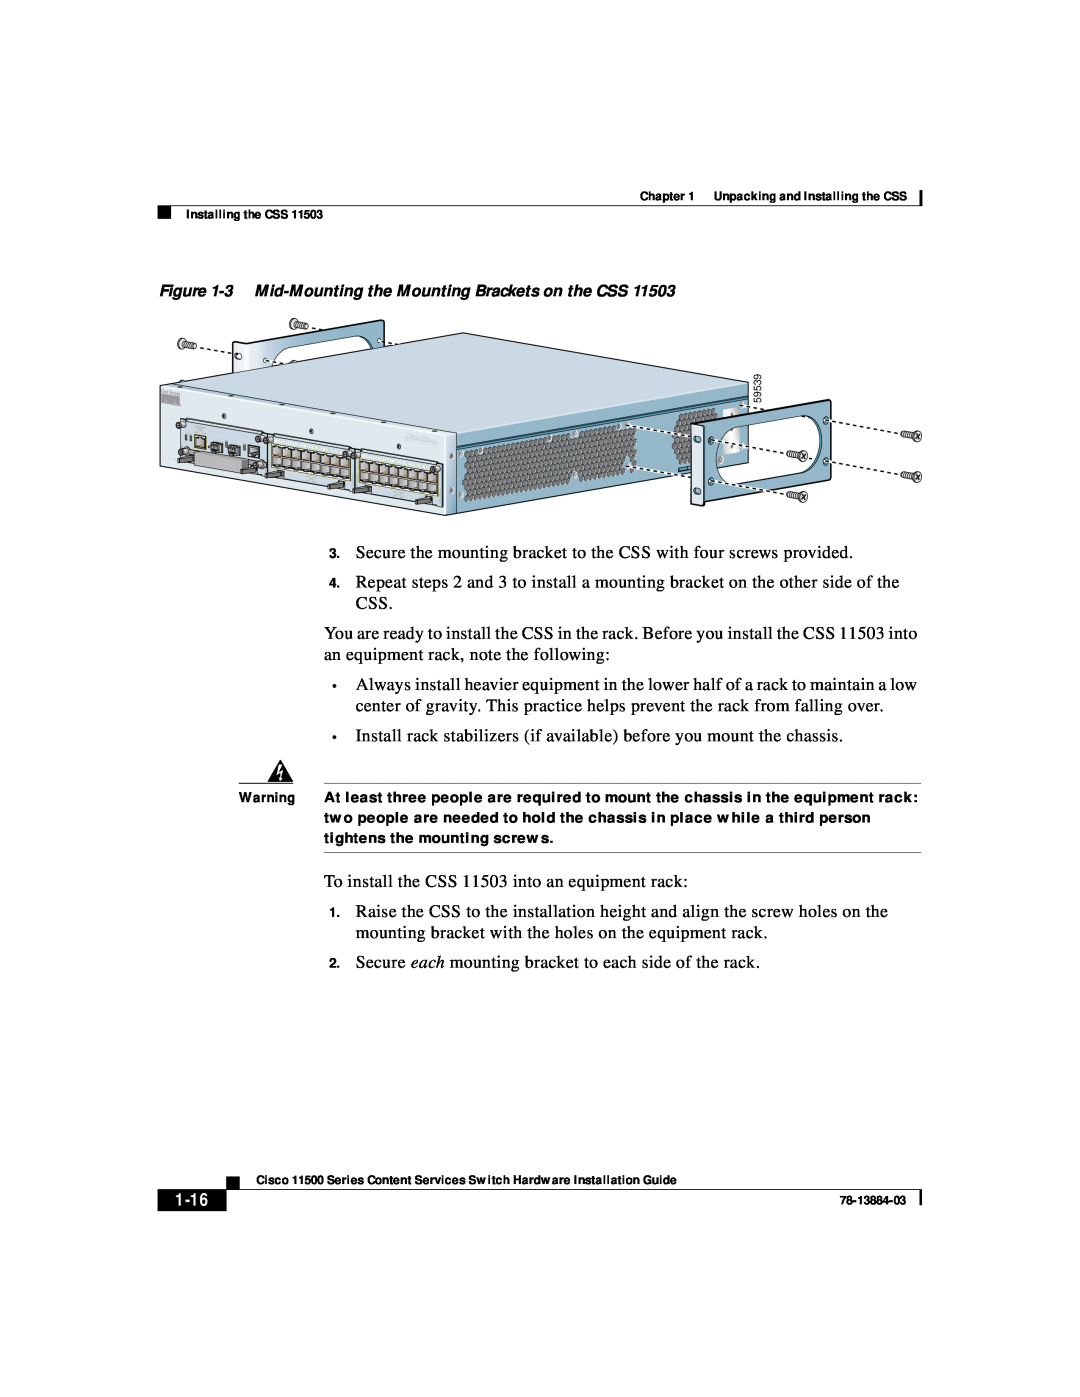 Cisco Systems 11500 Series manual 1-16, 3 Mid-Mounting the Mounting Brackets on the CSS 